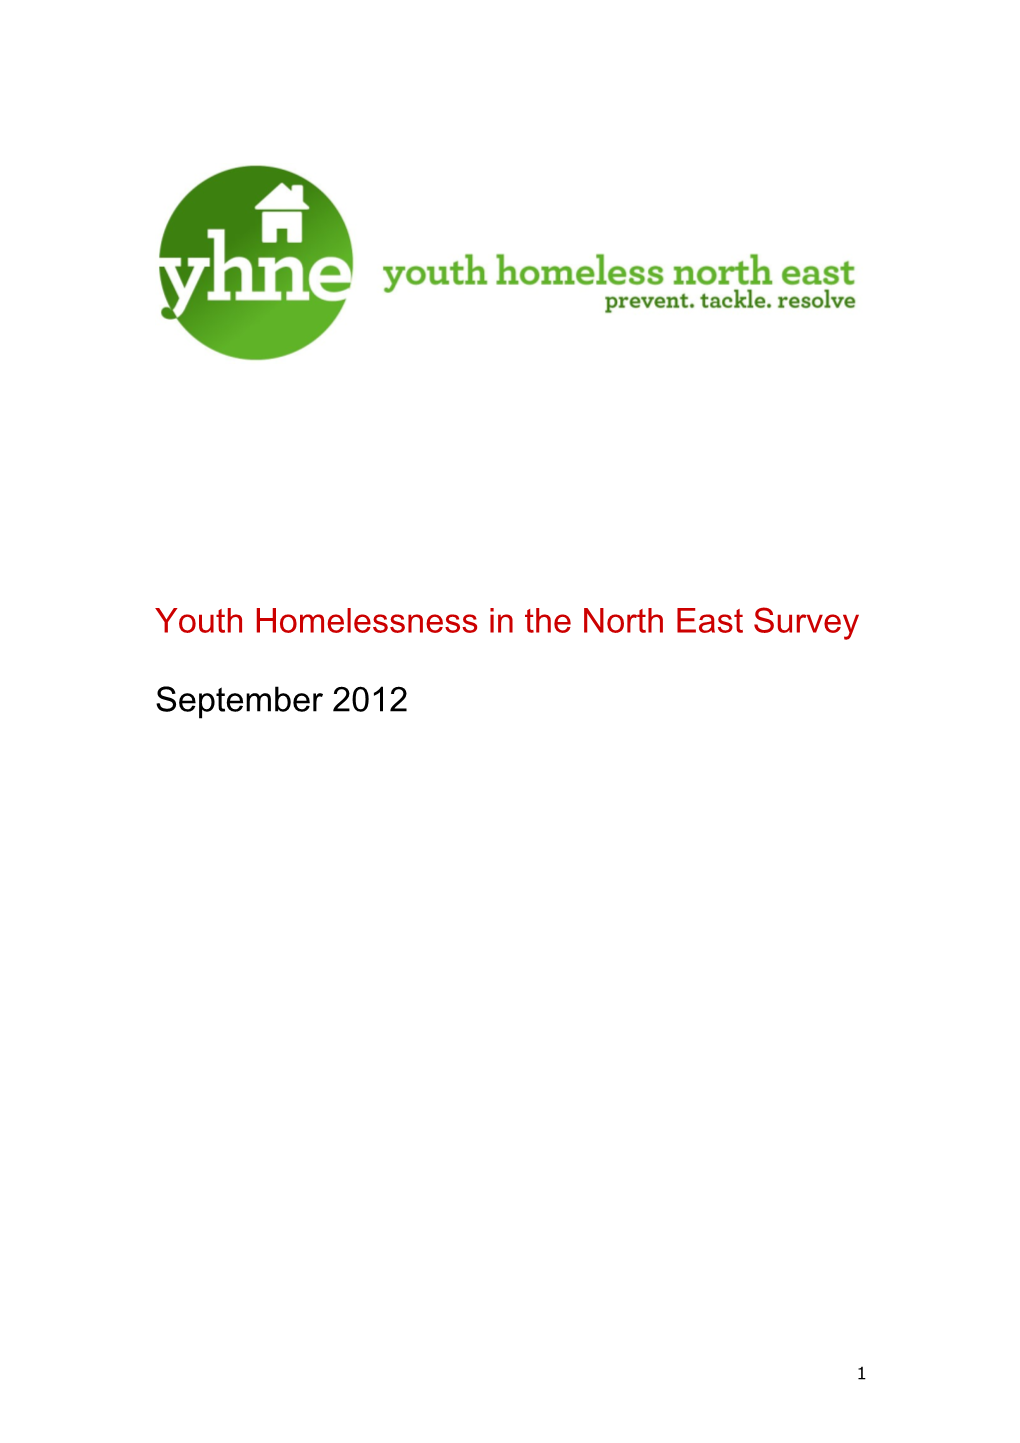 Findings of North East Youth Homelessness Survey